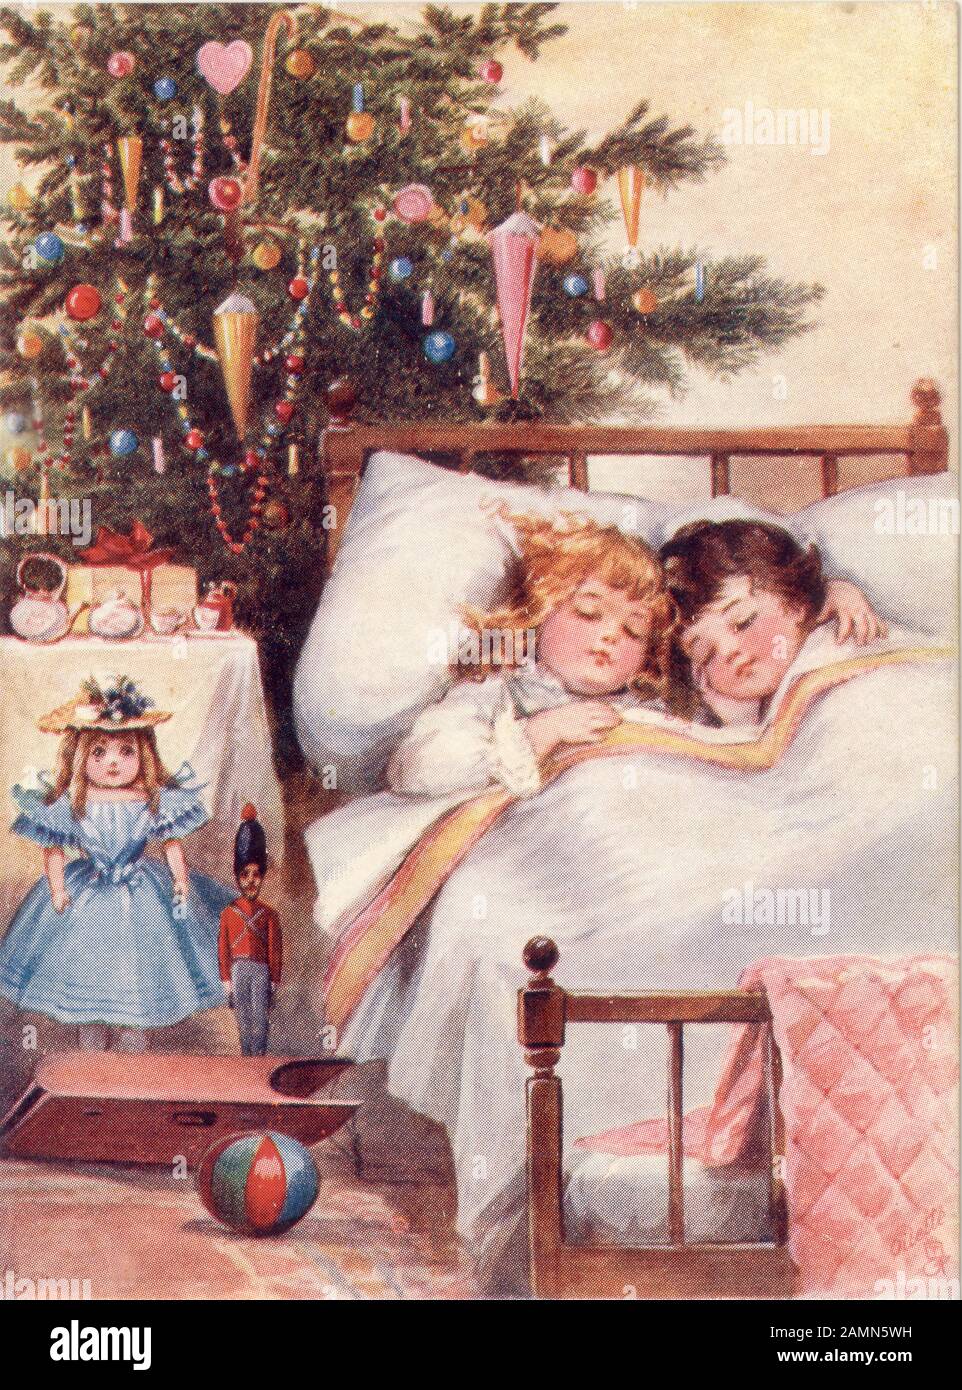 Original charming cute Christmas traditional greetings postcard of children tucked up in bed on Christmas morning with presents and tree, original oilette, circa 1900's  England, U.K. Stock Photo